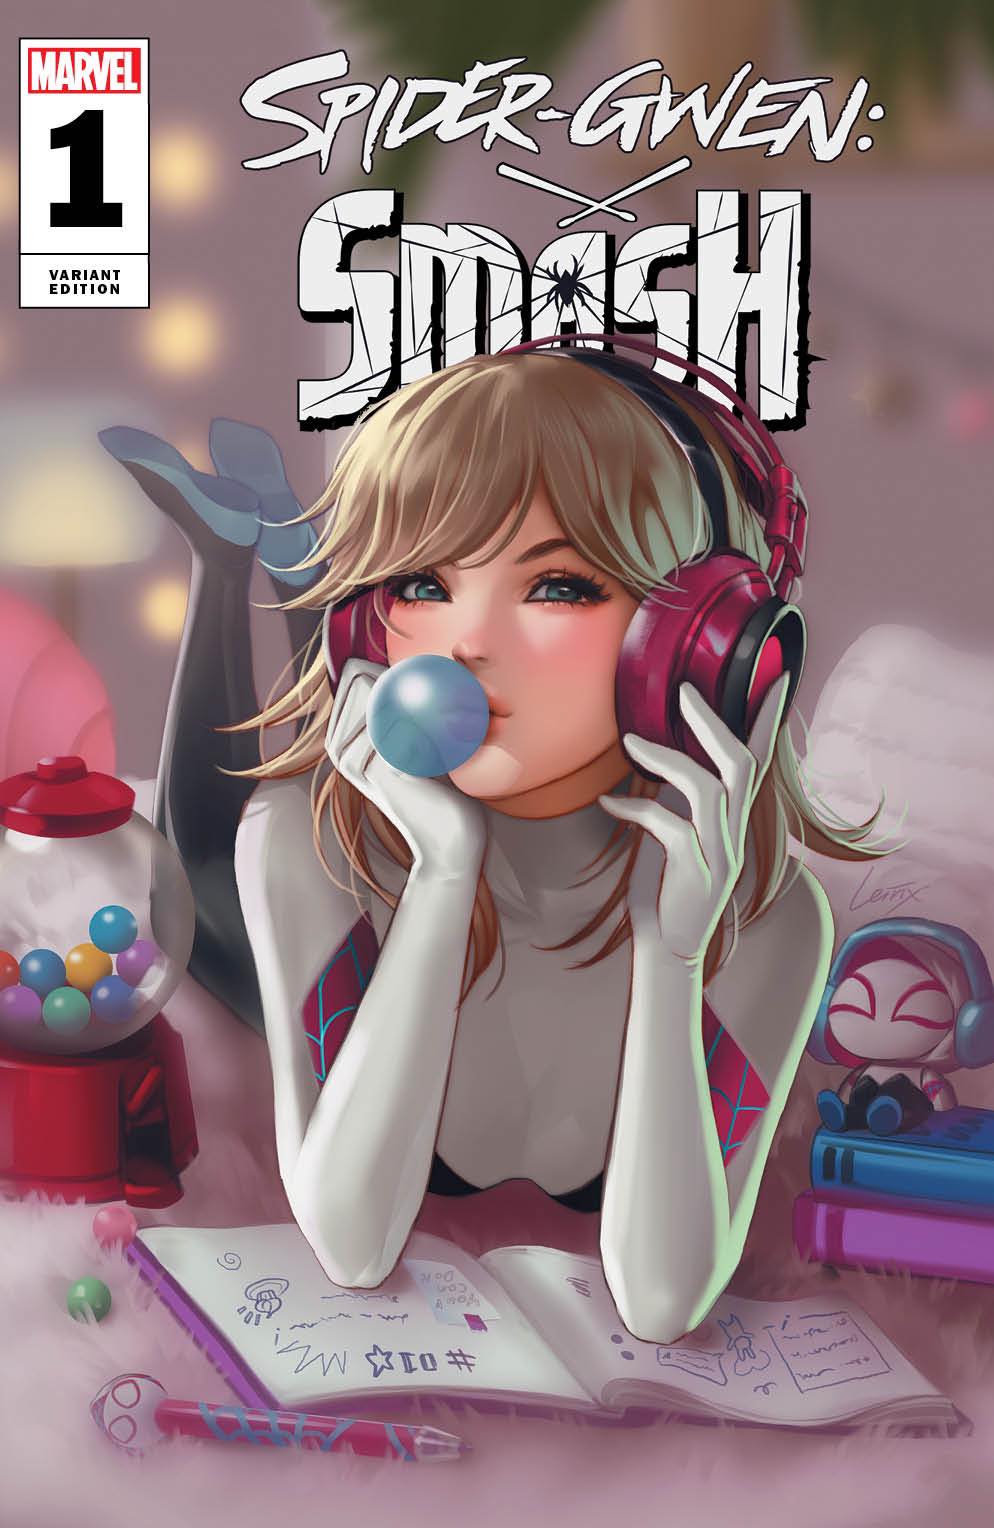 SPIDER-GWEN : SMASH #1 LEIRIX VARIANT LIMITED TO 500 COPIES WITH NUMBERED COA